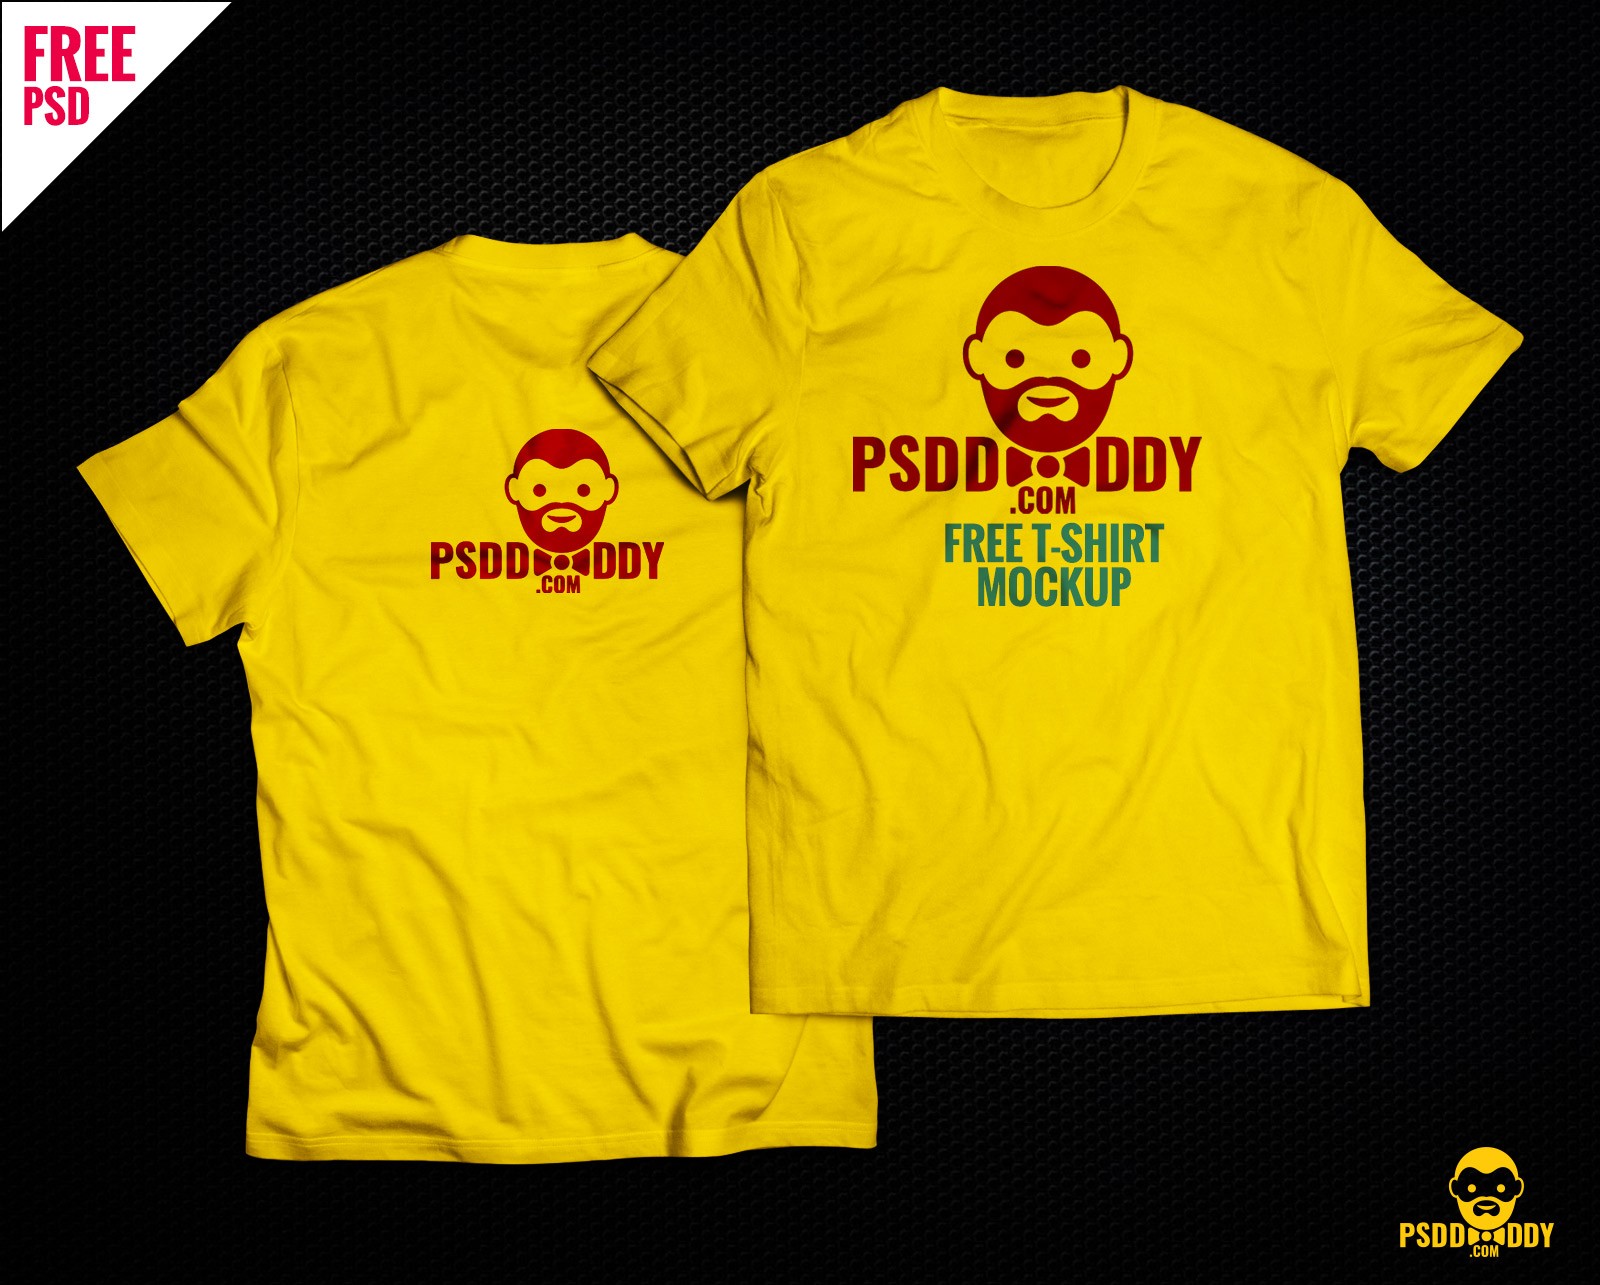 60 Free T Shirt Mockup Psd Templates To Download 2020